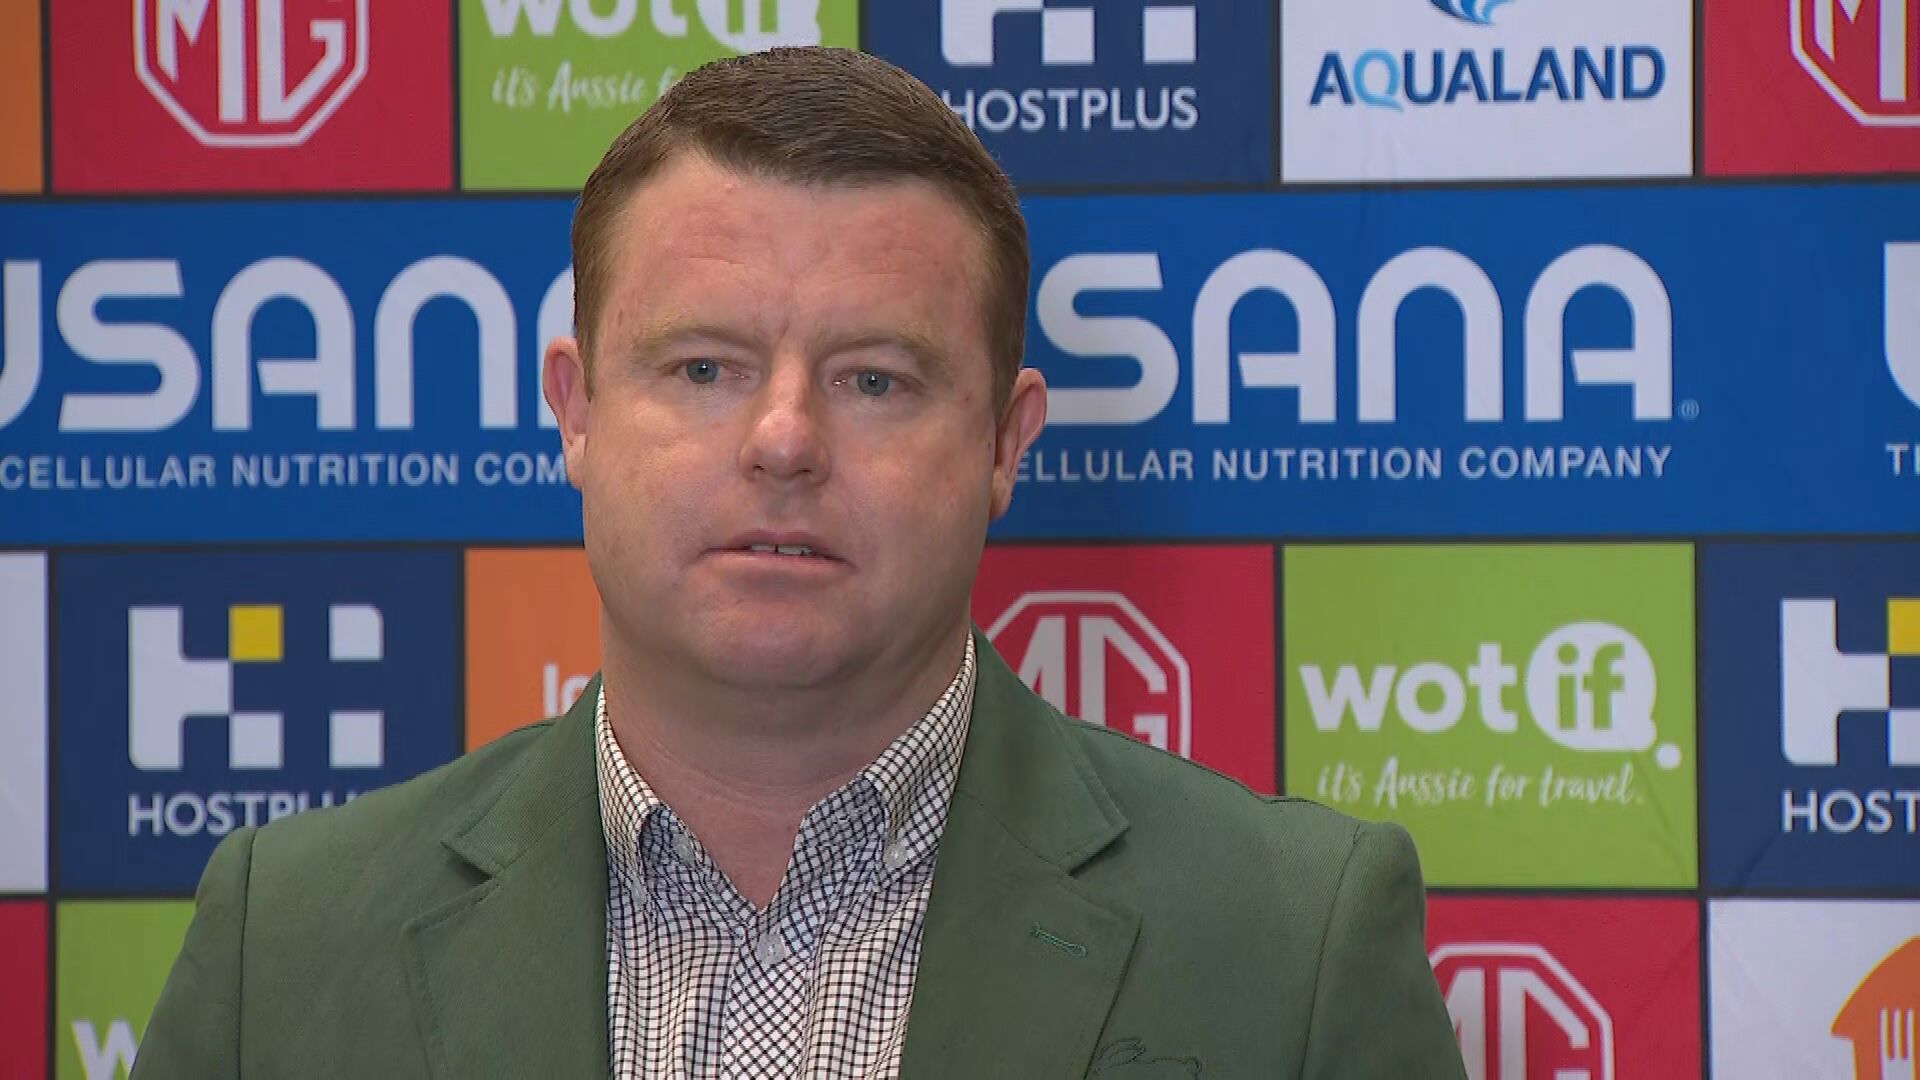 South Sydney boss explains sacking delay as Demetriou's agent rips 'extremely cruel' process